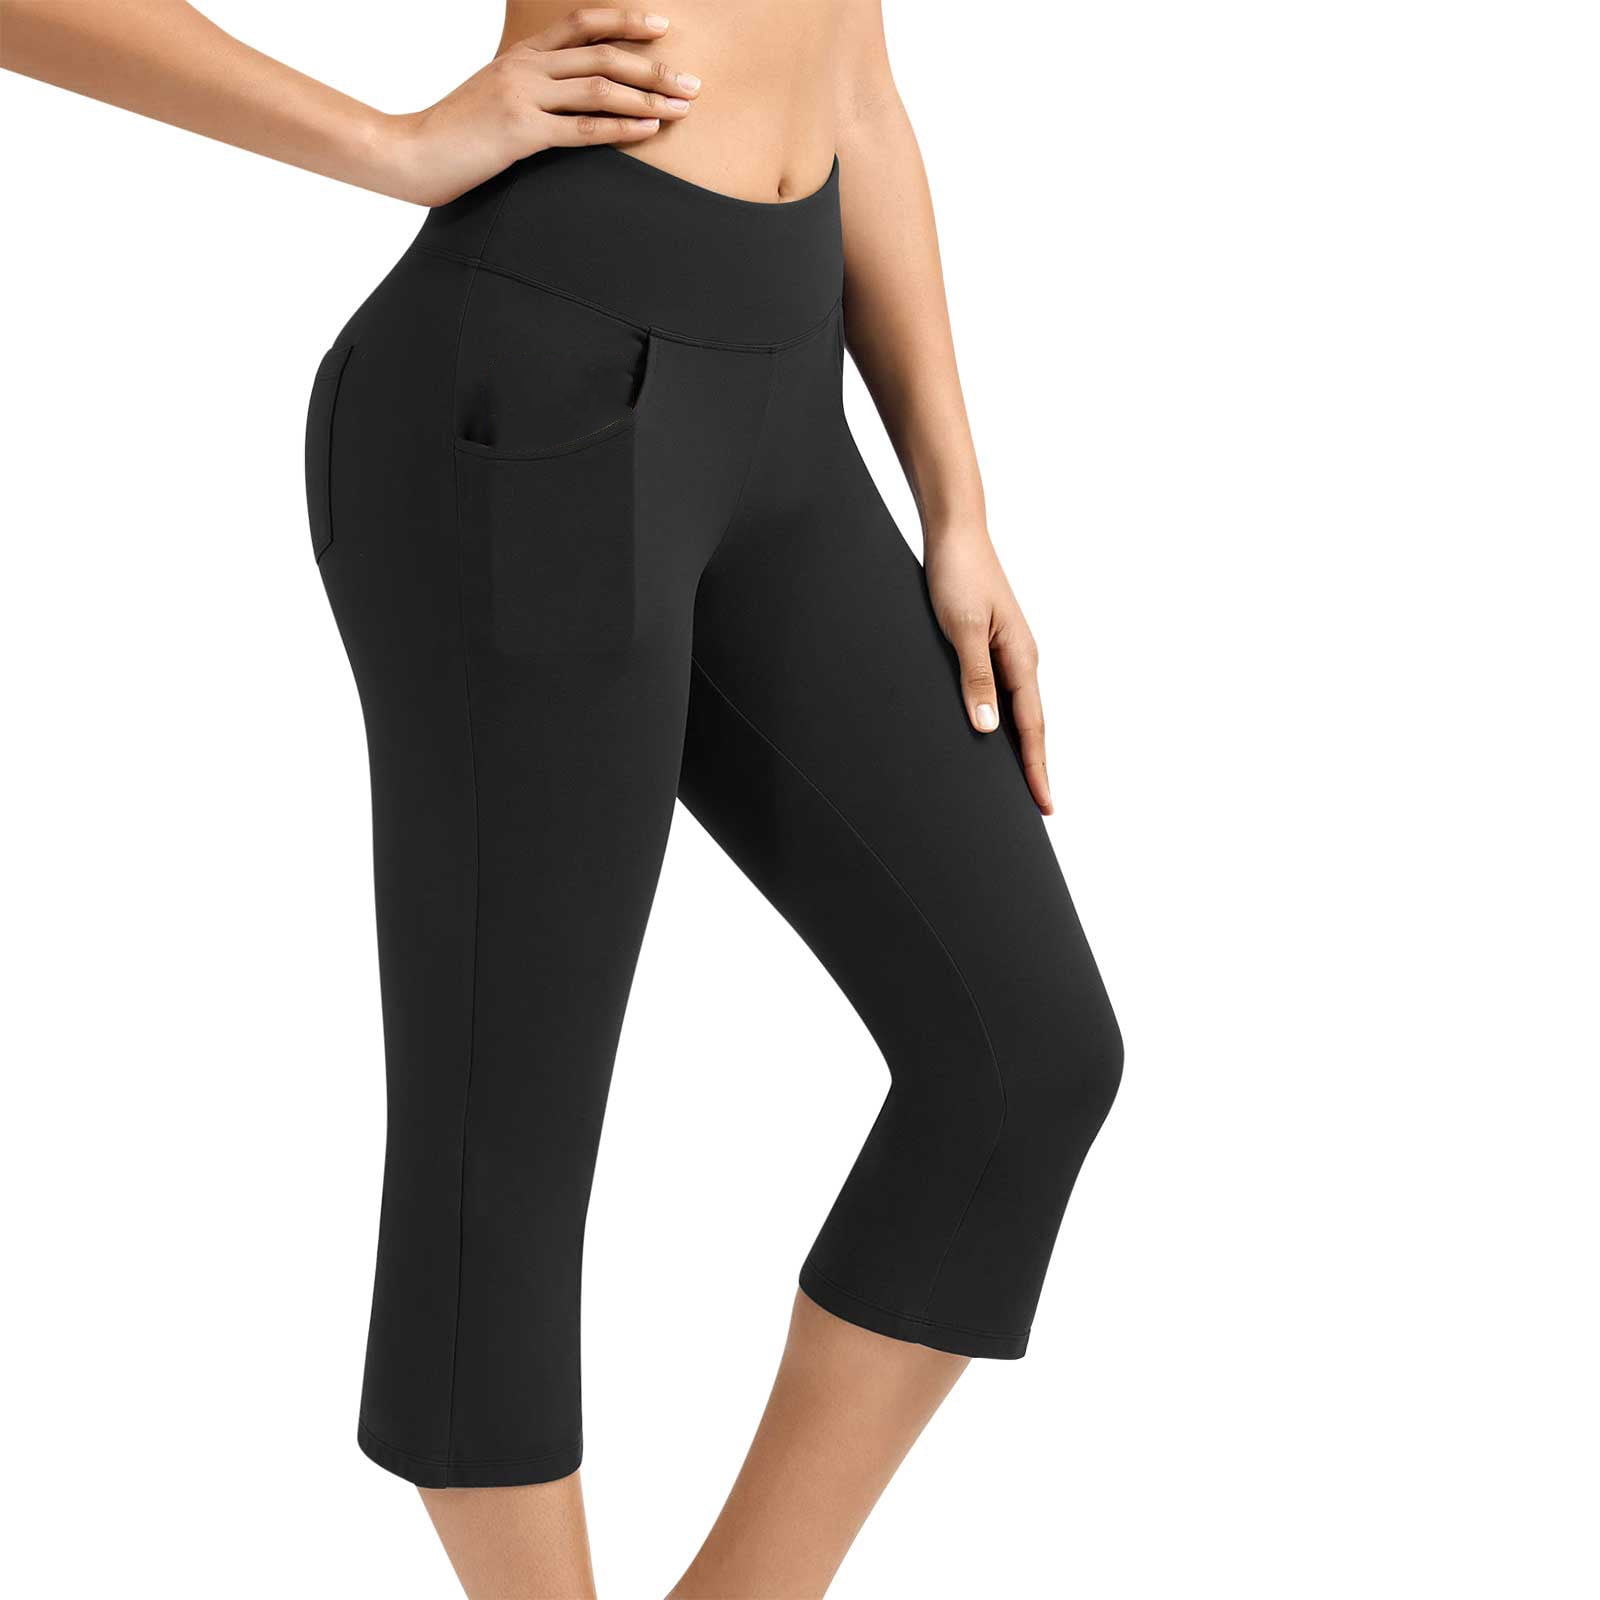 YWDJ High Compression Leggings for Women Quick Dry Solid Pocket Capris Yoga  PantsPinkXL 